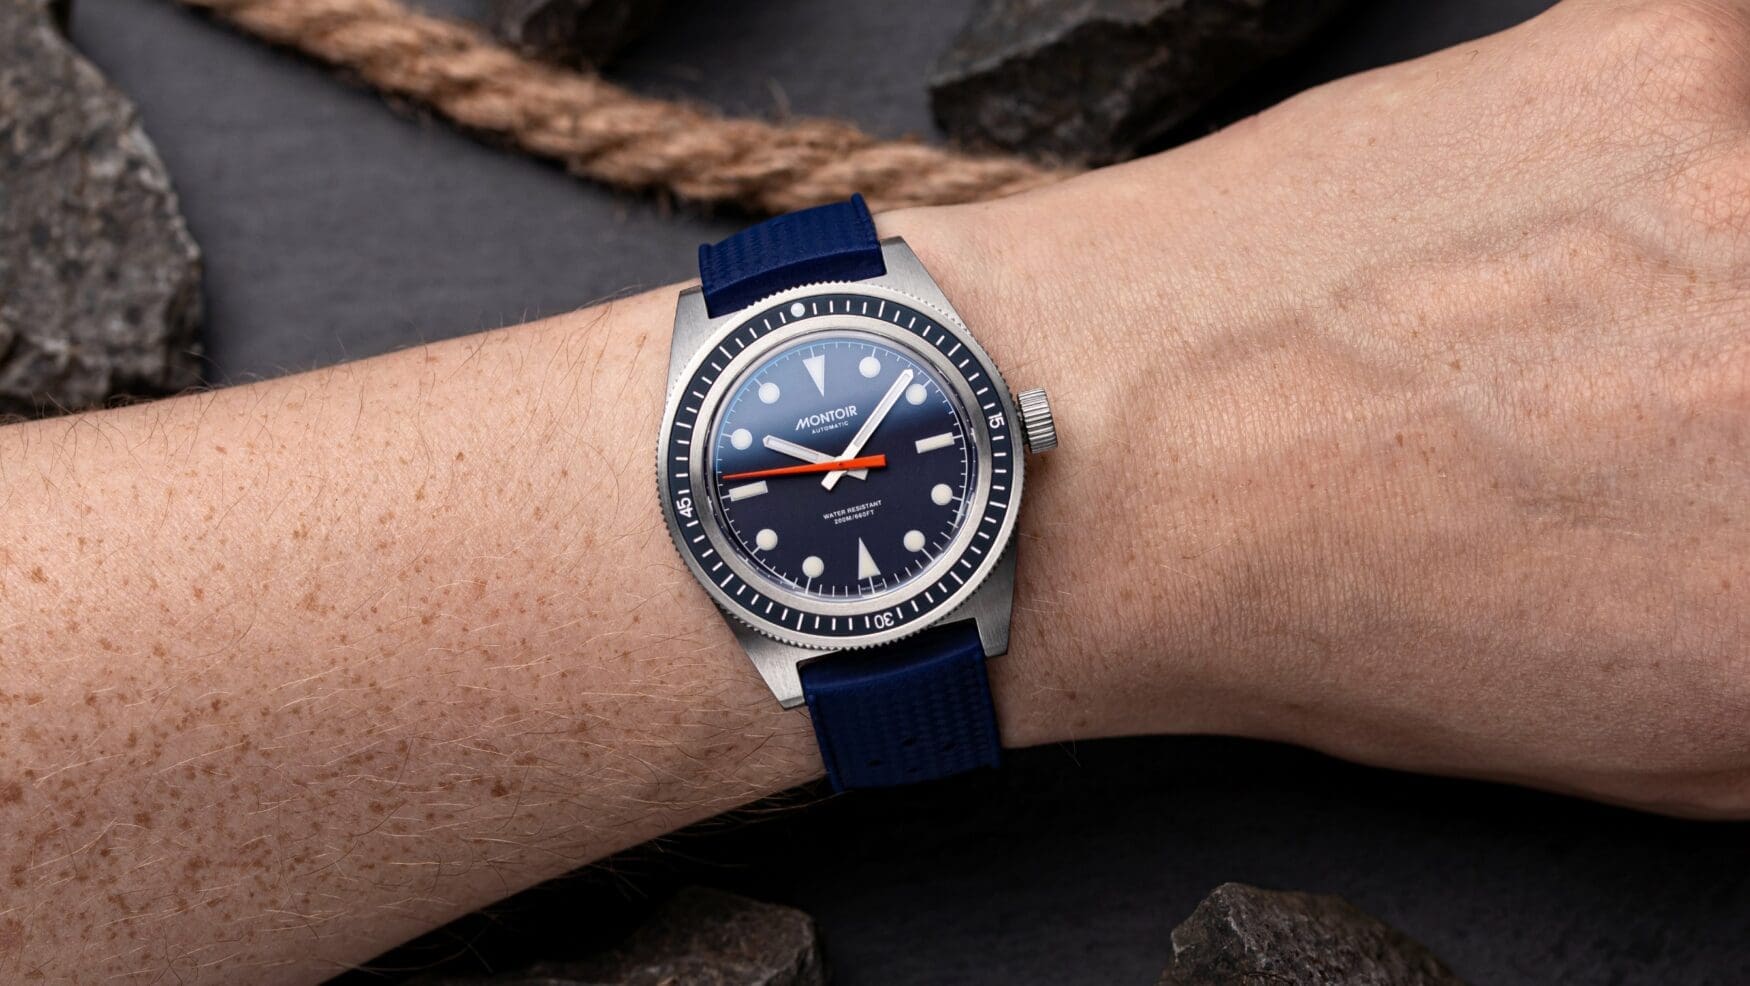 The Montoir Dive Watch is an impressively affordable first effort from a new microbrand